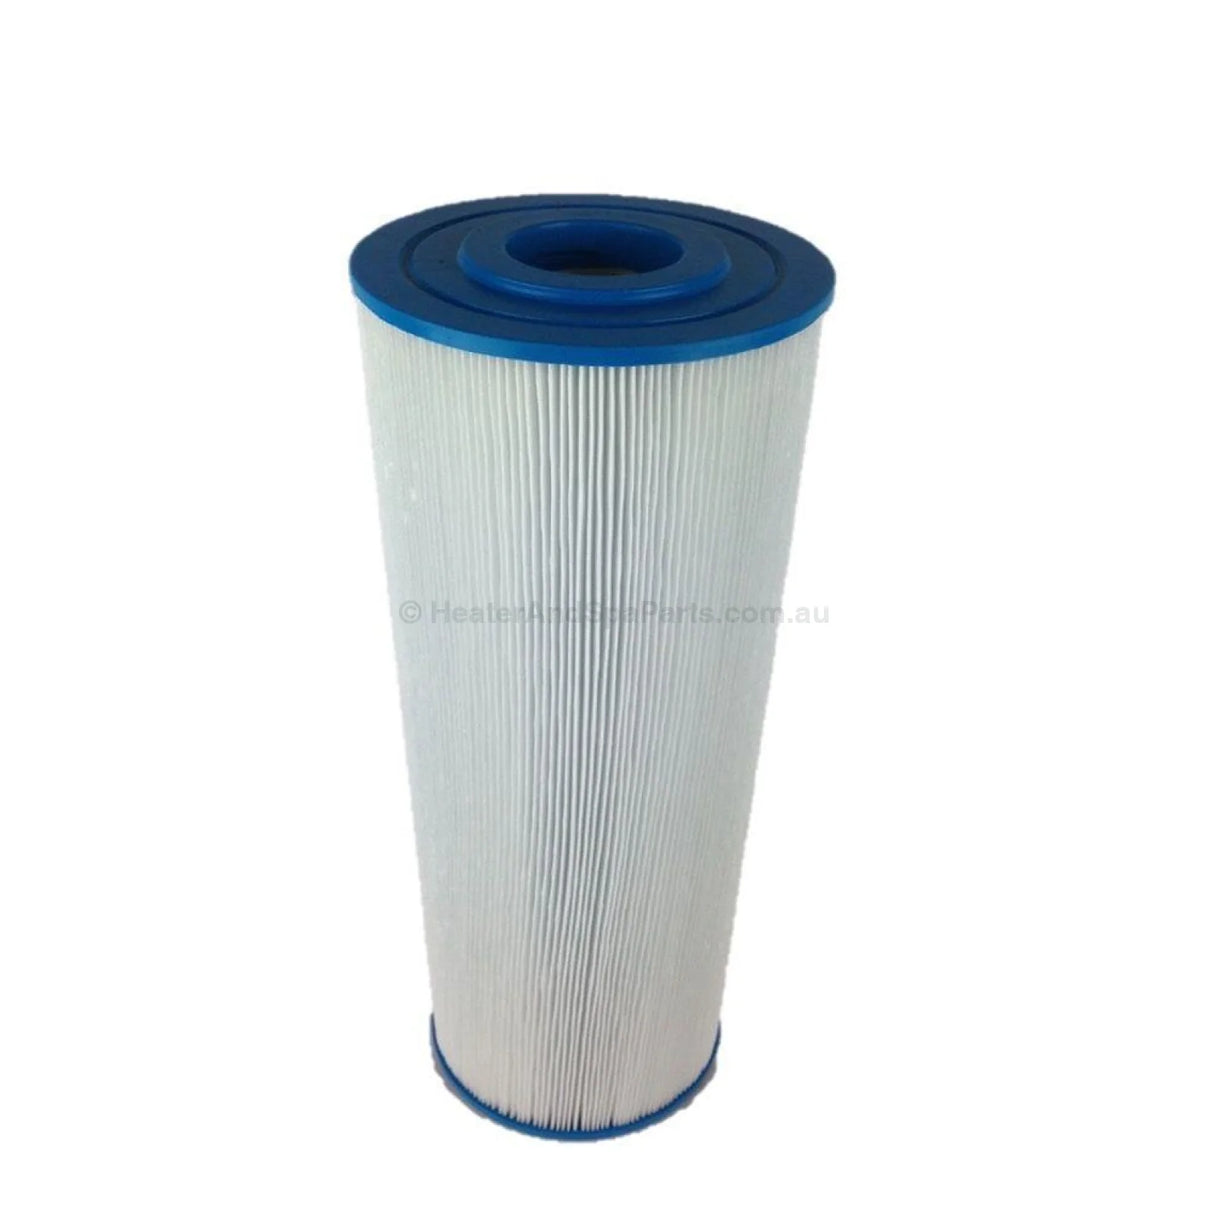 452mm x 143mm Spa-Quip Series 1000 C75 Niche Replacement Cartridge Filter - Heater and Spa Parts